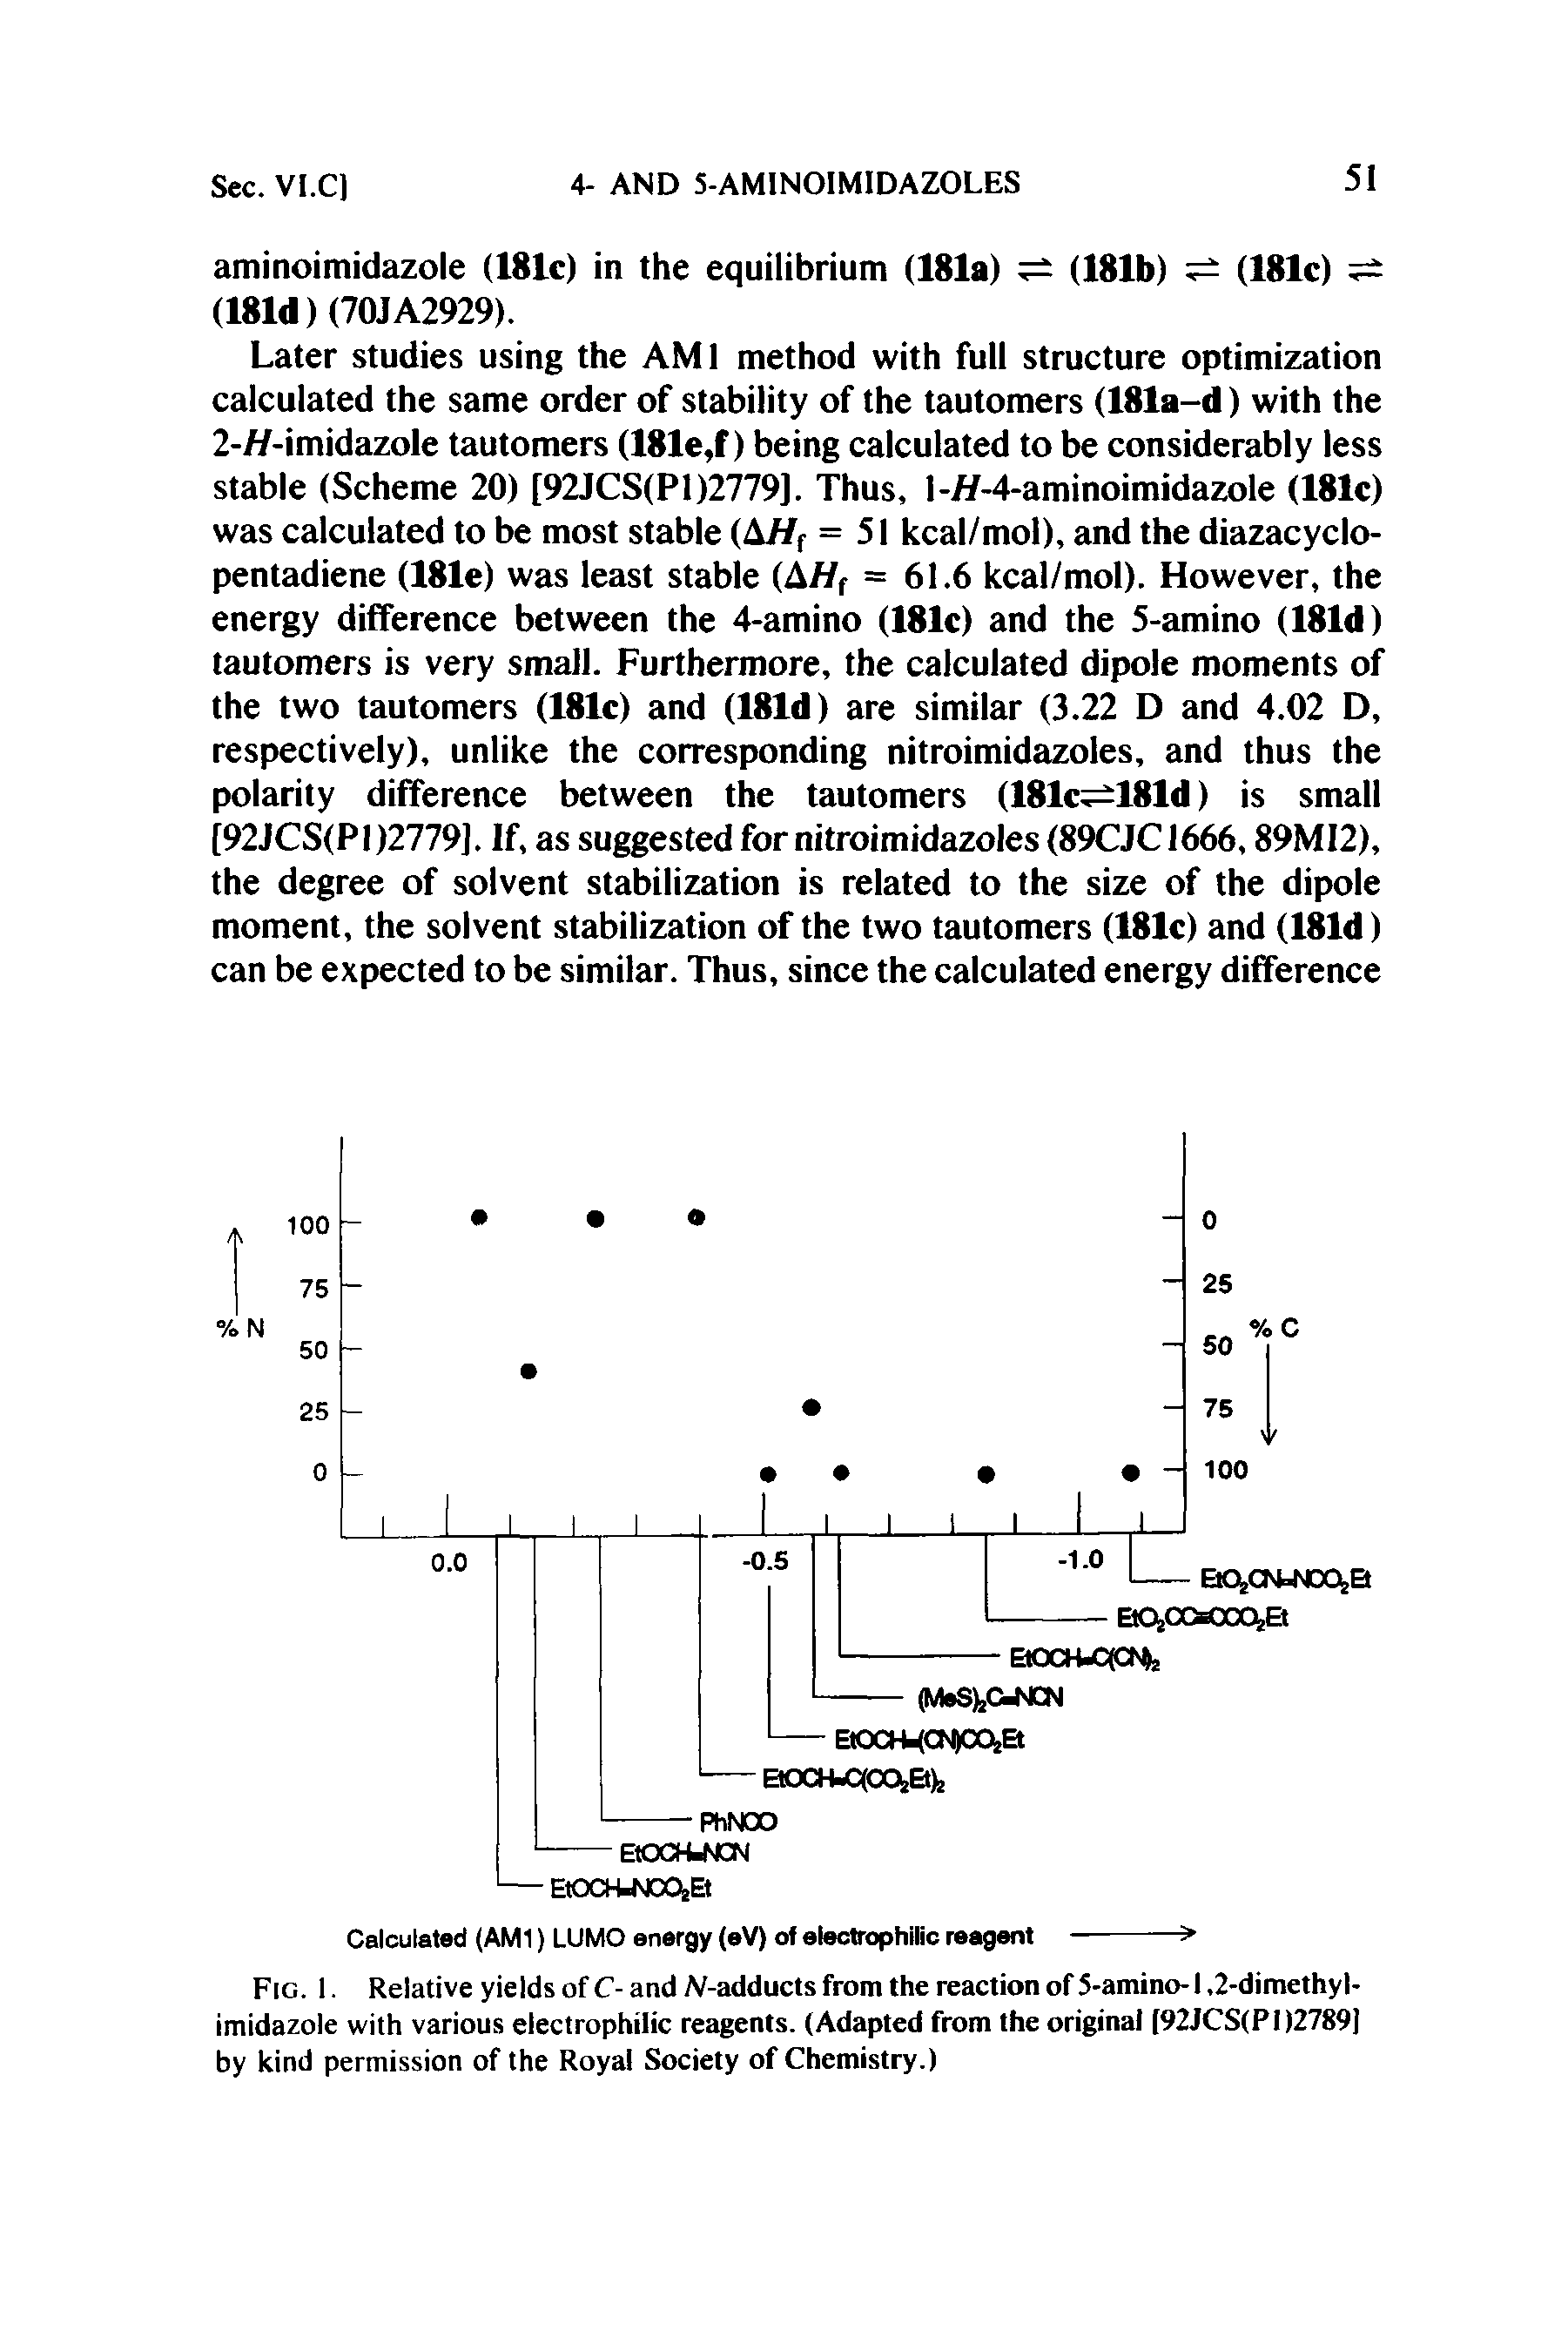 Fig. 1. Relative yields of C- and /V-adducts from the reaction of 5-amino-1,2-dimethyl-imidazole with various electrophilic reagents. (Adapted from the original [92JCS(P1)2789] by kind permission of the Royal Society of Chemistry.)...